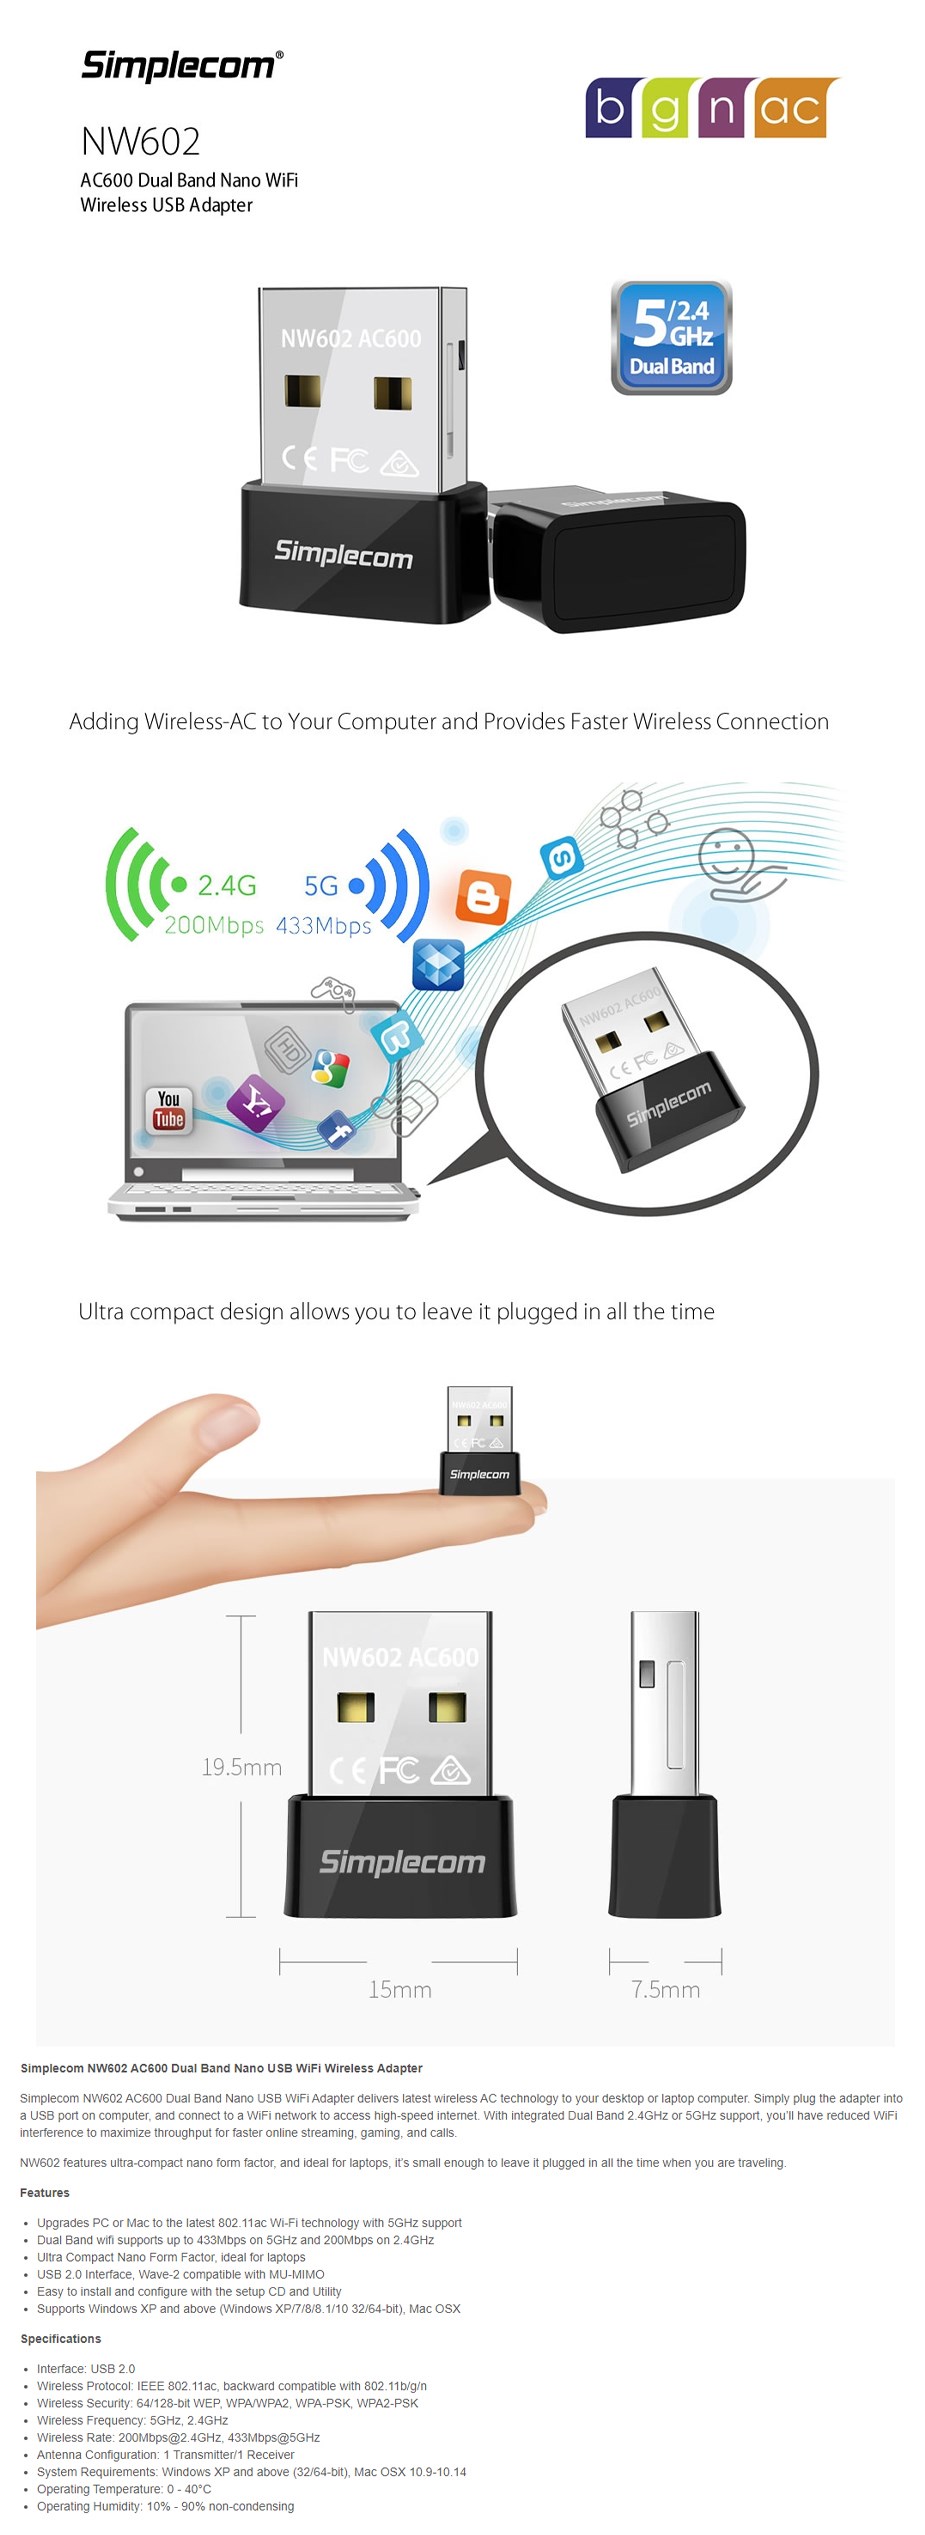 A large marketing image providing additional information about the product Simplecom NW602 AC600 Dual-Band Nano USB WiFi Adapter - Additional alt info not provided